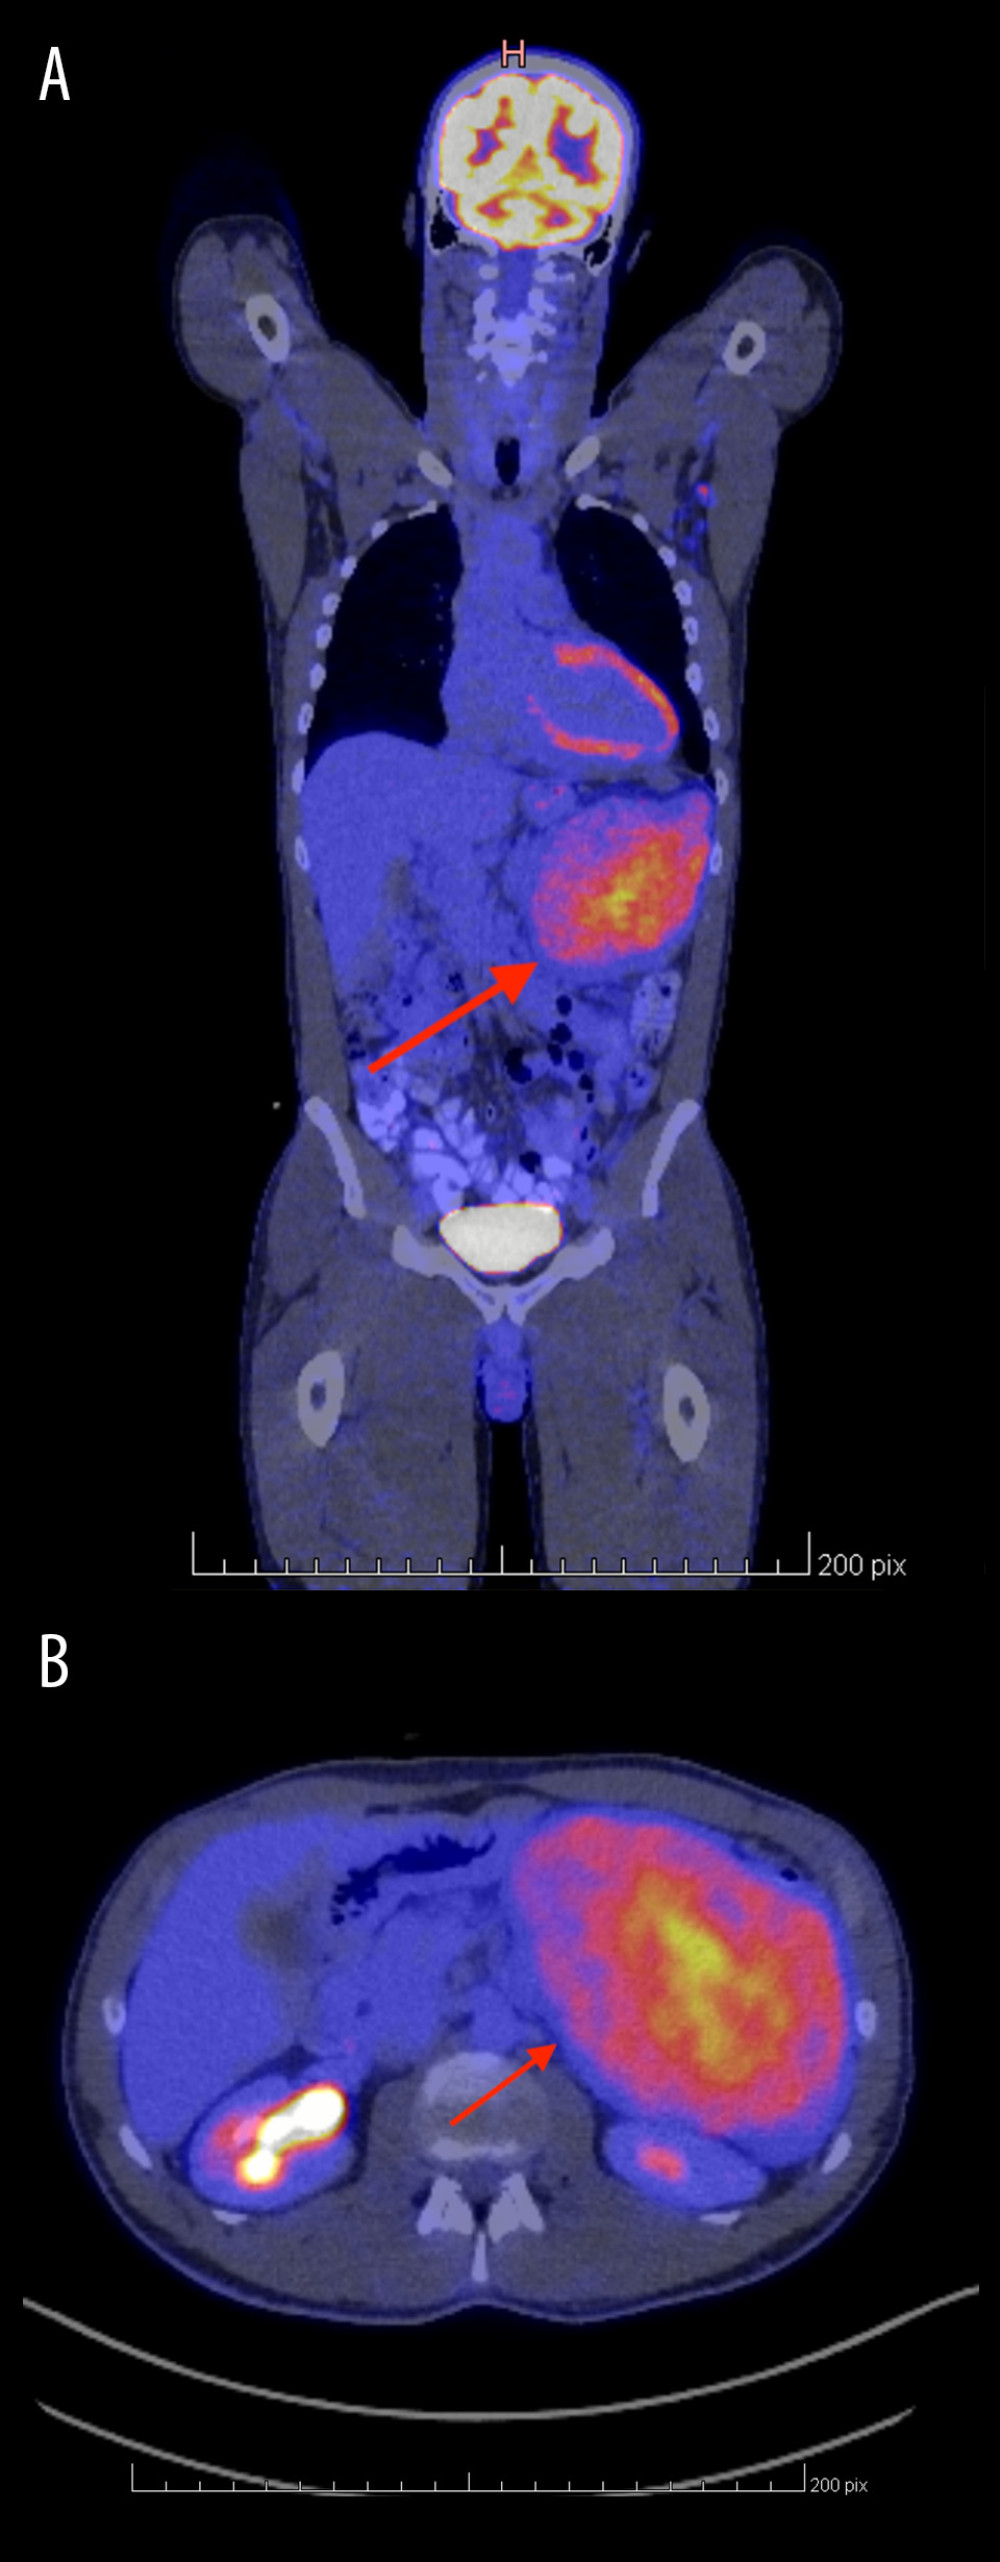 PET/CT scan showing hypermetabolic signal of the pancreatic mass and absence of secondary tumors. Red arrows indicate the hypermetabolic tumor. (A) Frontal view. (B) Axial view.